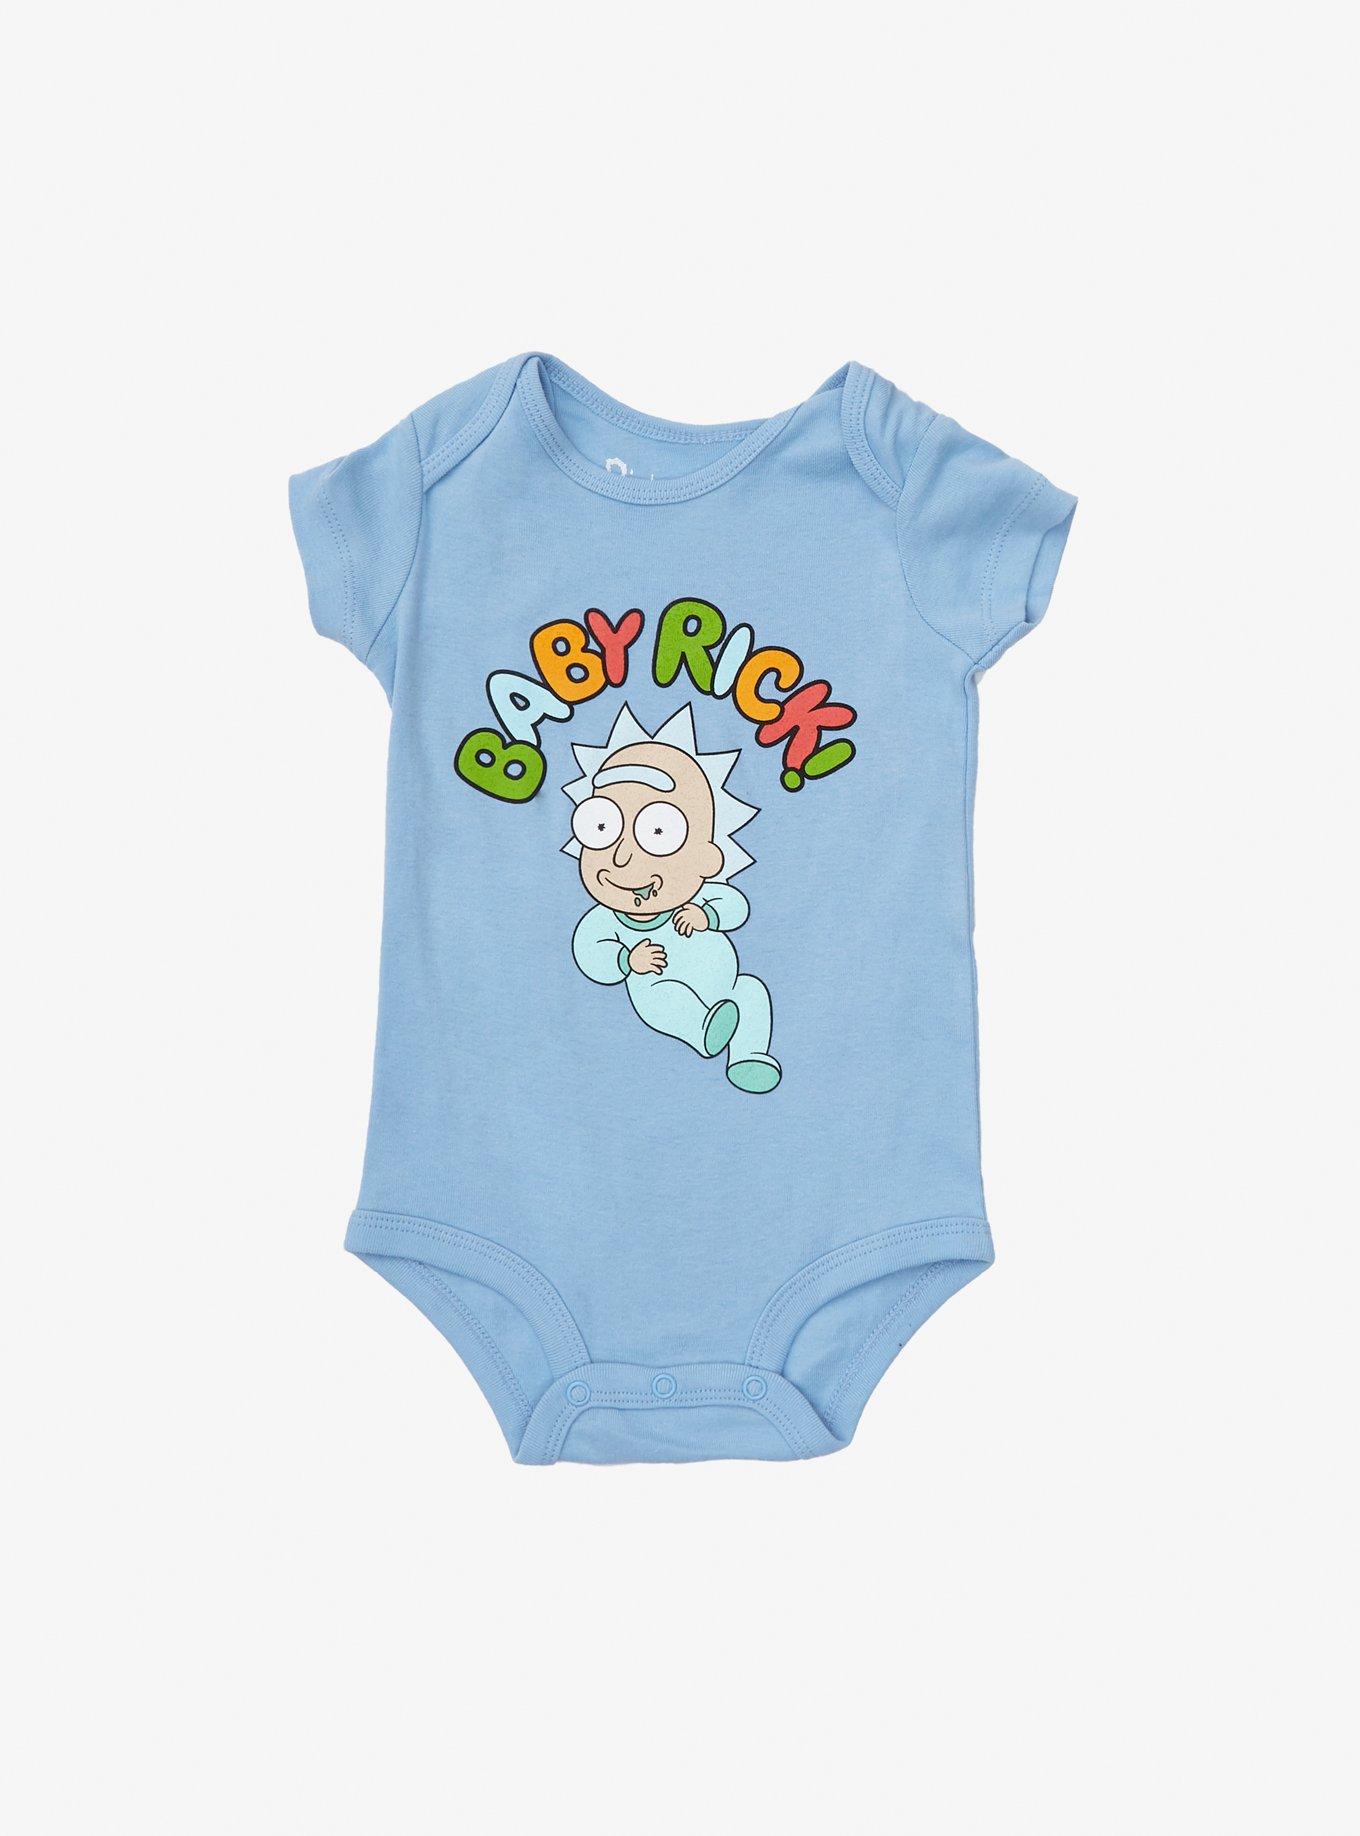 Rick and Morty Baby Rick Infant Bodysuit - BoxLunch Exclusive, BLUE, hi-res